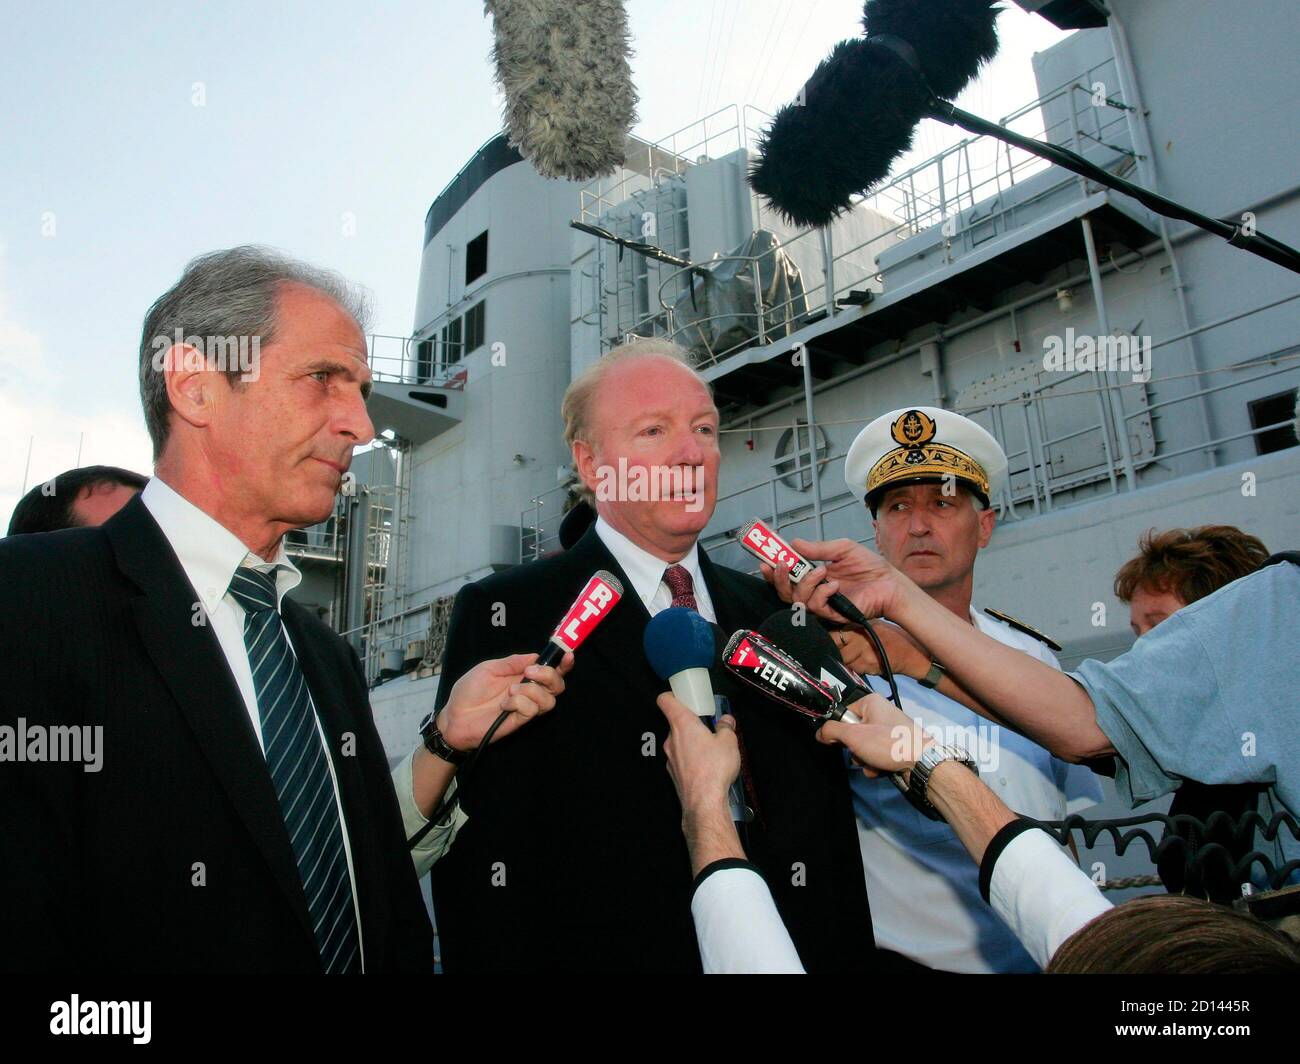 Brice Hortefeux, France's Minister of Immigration, Integration, National  Identity and Co-Development, speaks to the media next to Hubert Falco (L),  Mayor of Touolon and prefet maritime Jean Tandonnet (R) near the French